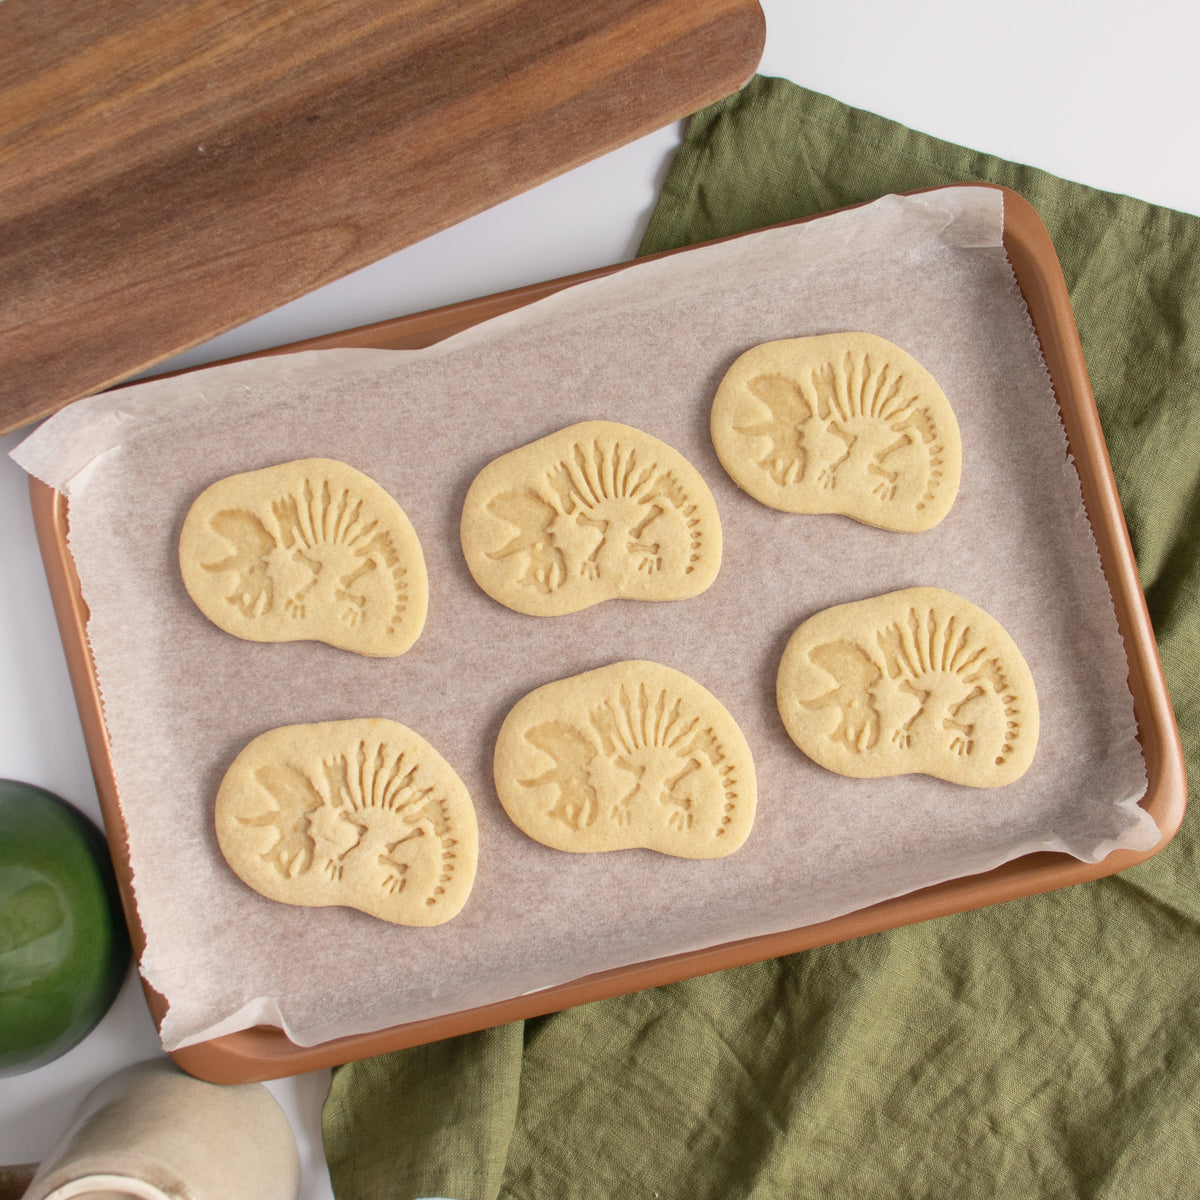 Triceratops Dinosaur Fossil Cookies